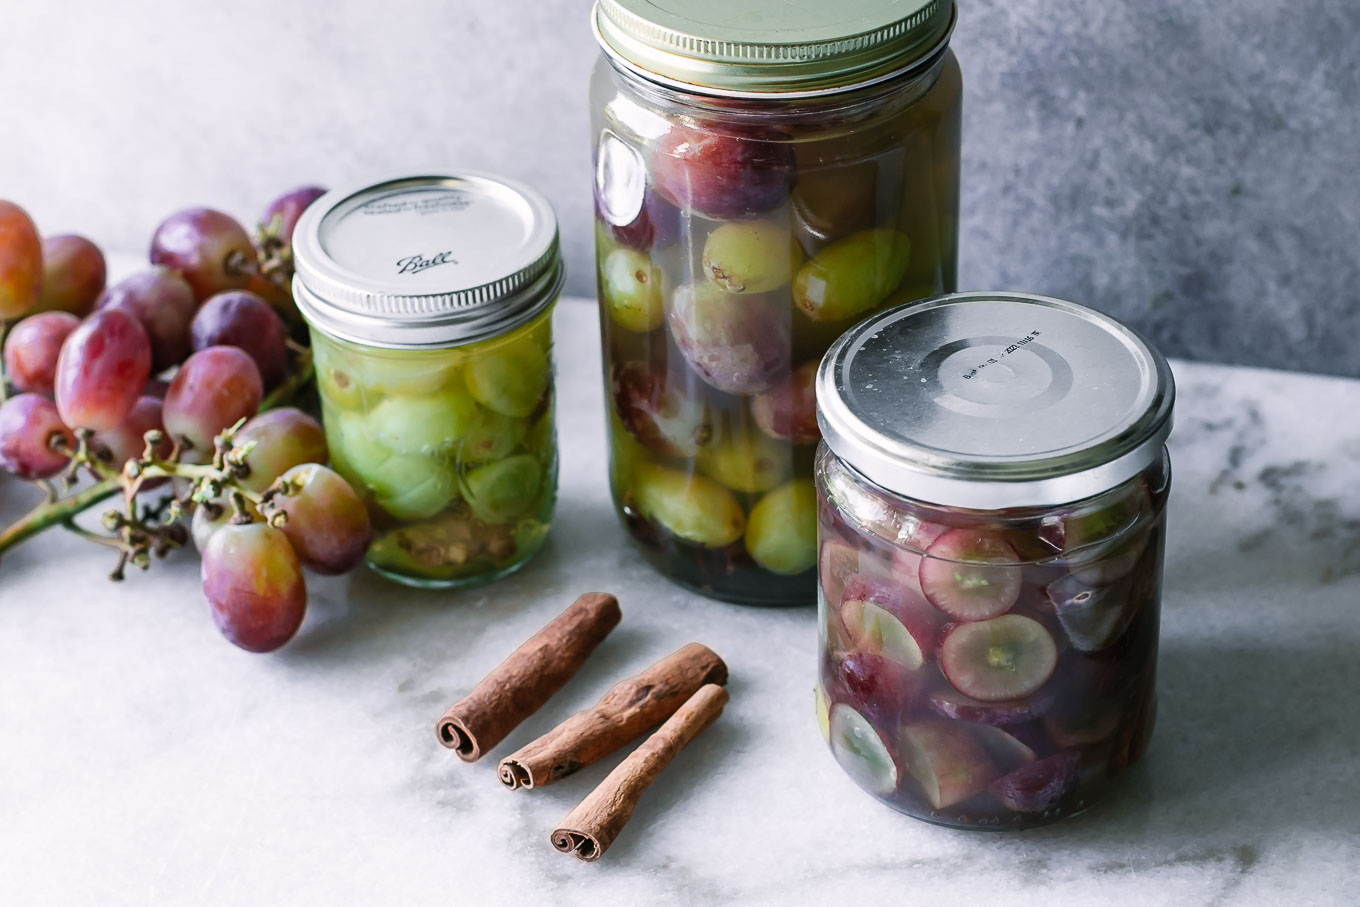 How To Store Grapes In Mason Jars